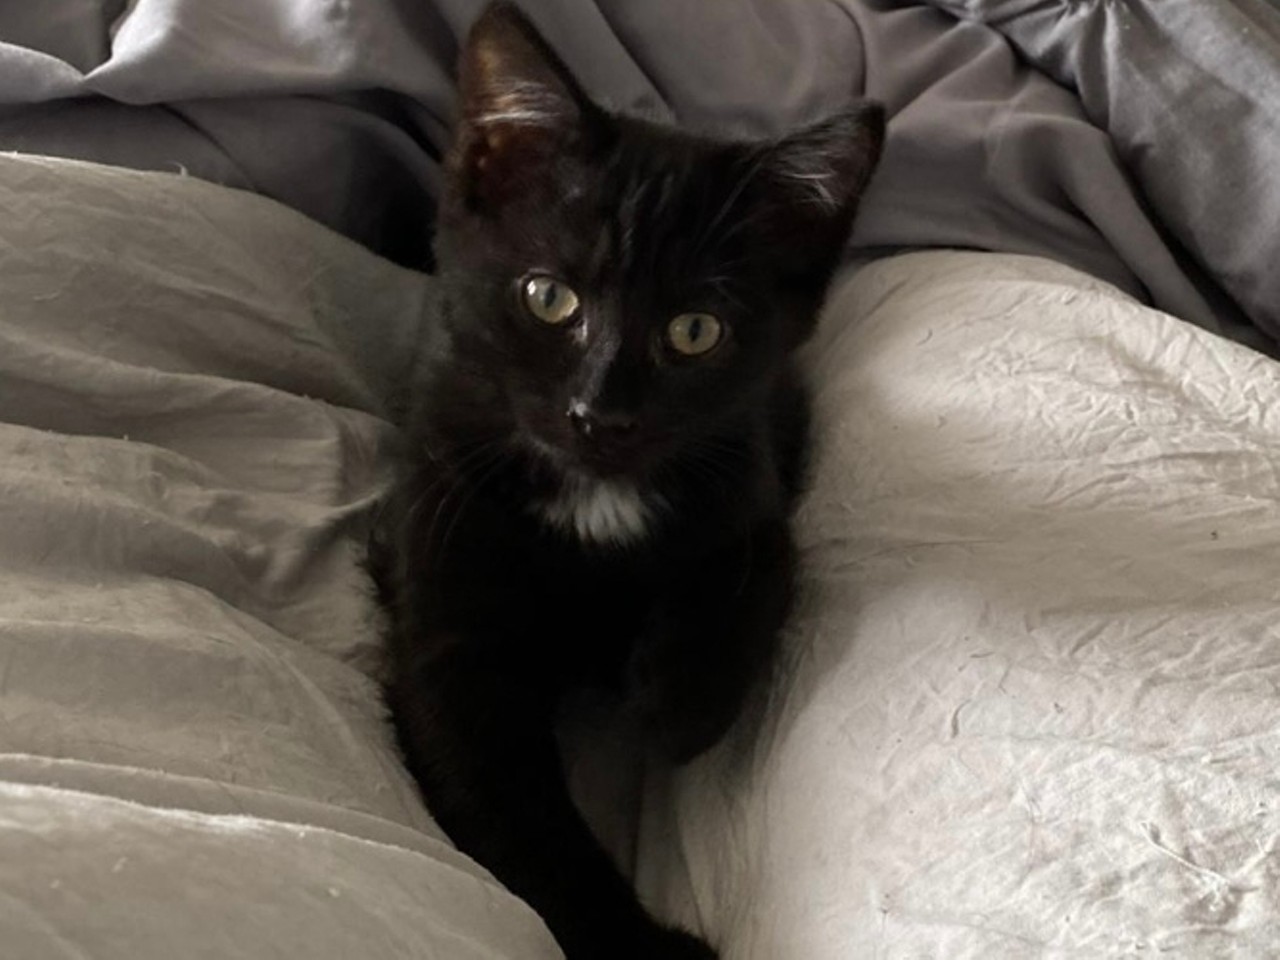 Lil Nas X; Available at Stray Rescue of St. Louis
(2320 Pine Street, 314-771-6121)
Whoever said black cats are bad luck was seriously mistaken. Lil Nas X, a five month old domestic shorthair, is a cutie looking for someone to call her by her name. Lil Nas X's biography on the Stray Rescue website says she plays hard and cuddles hard. Her animal ID is SRSL-A-6442. 
Photo credit: Stray Rescue of St. Louis